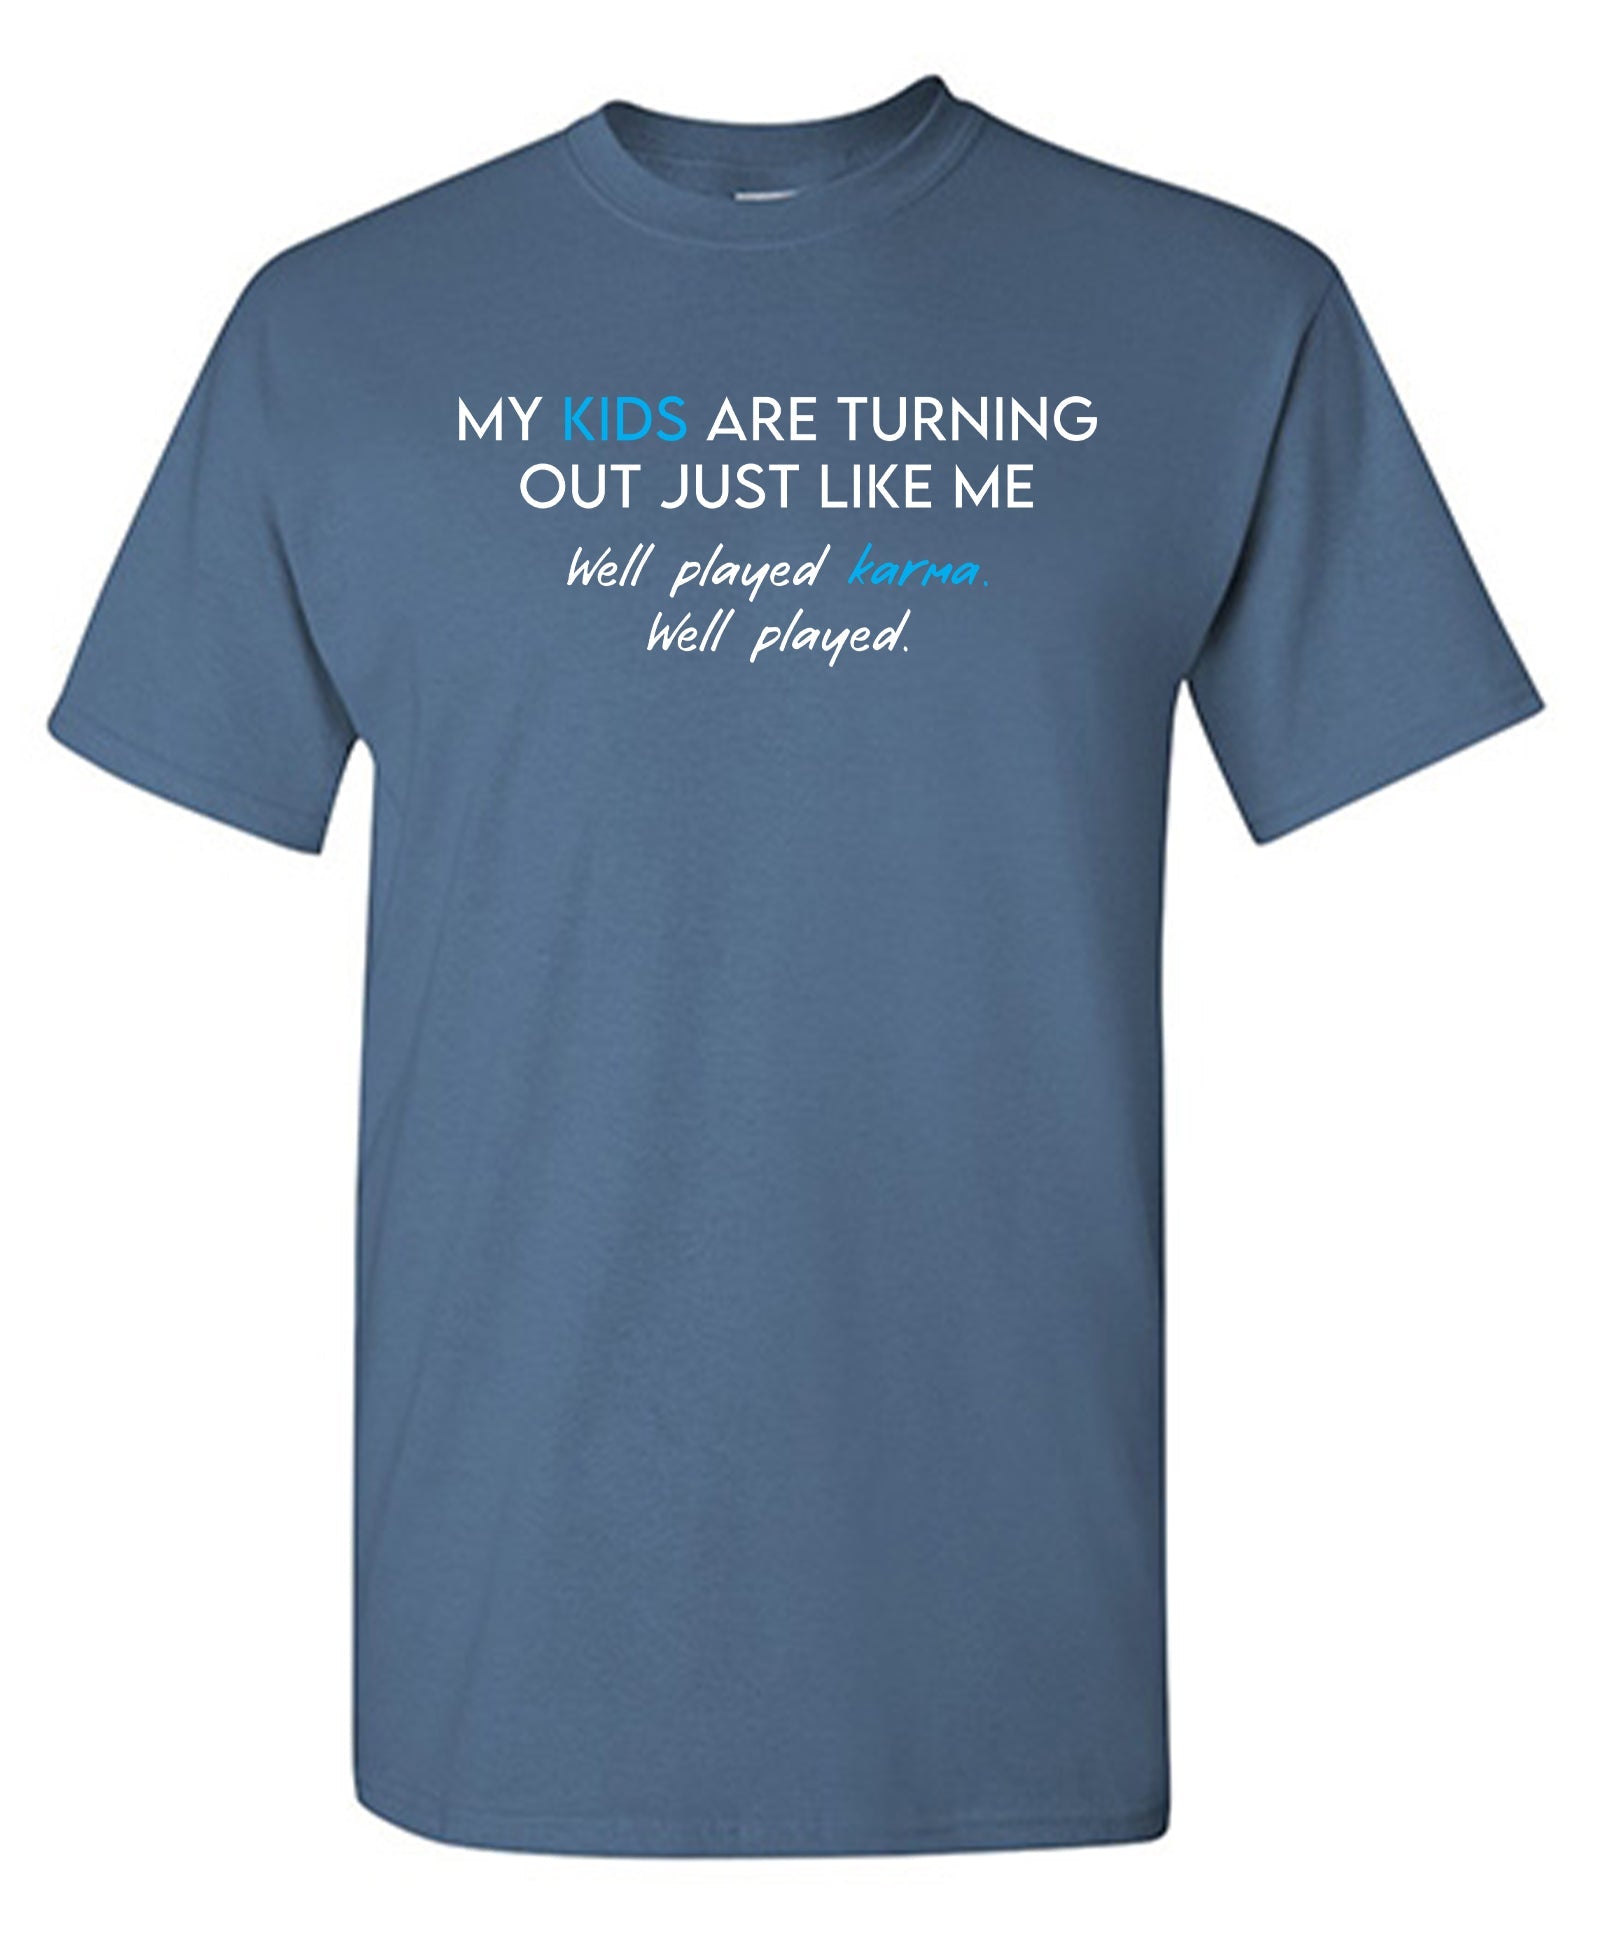 My Kids are Turning Out Just Like Me - Funny T Shirts & Graphic Tees